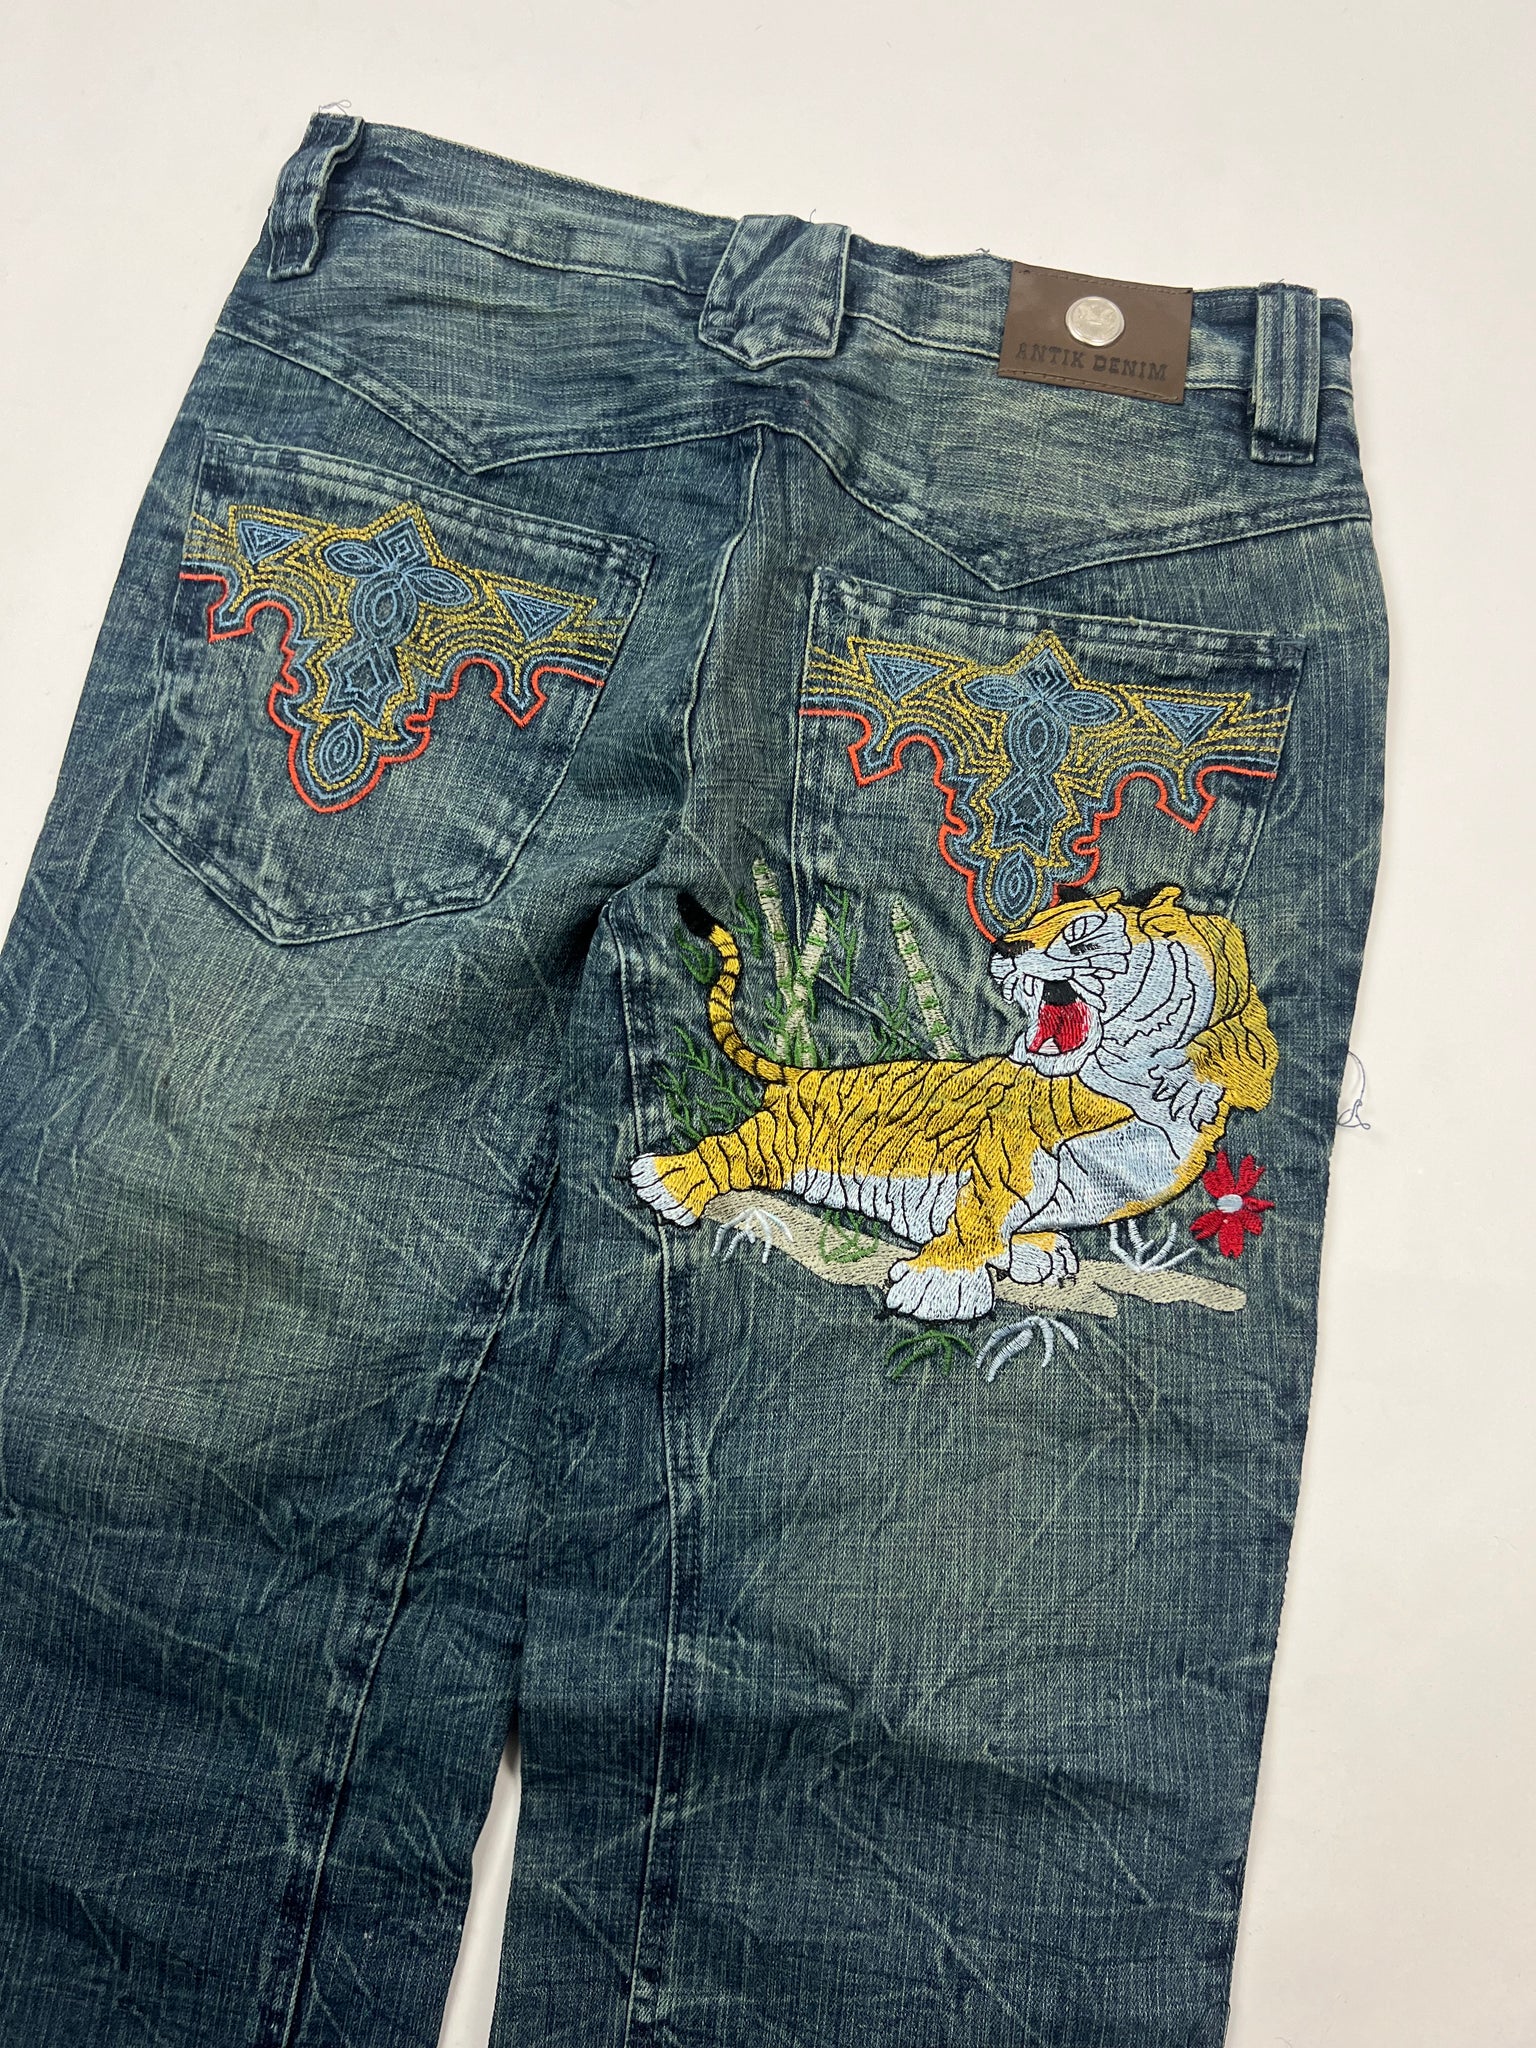 Ed Hardy Style Jeans (32)